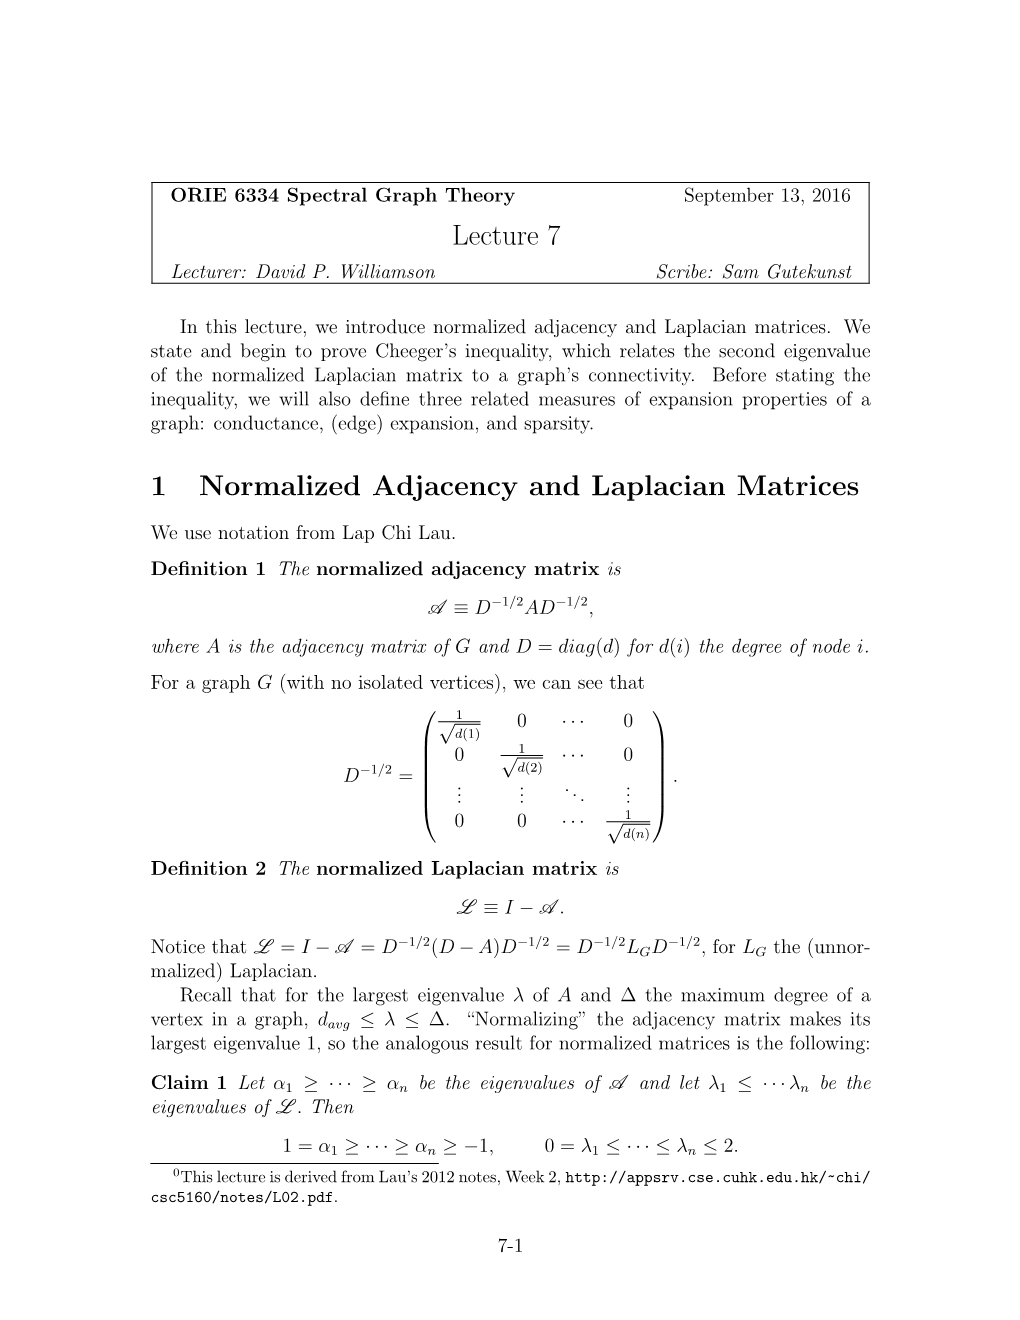 Lecture 7 1 Normalized Adjacency and Laplacian Matrices